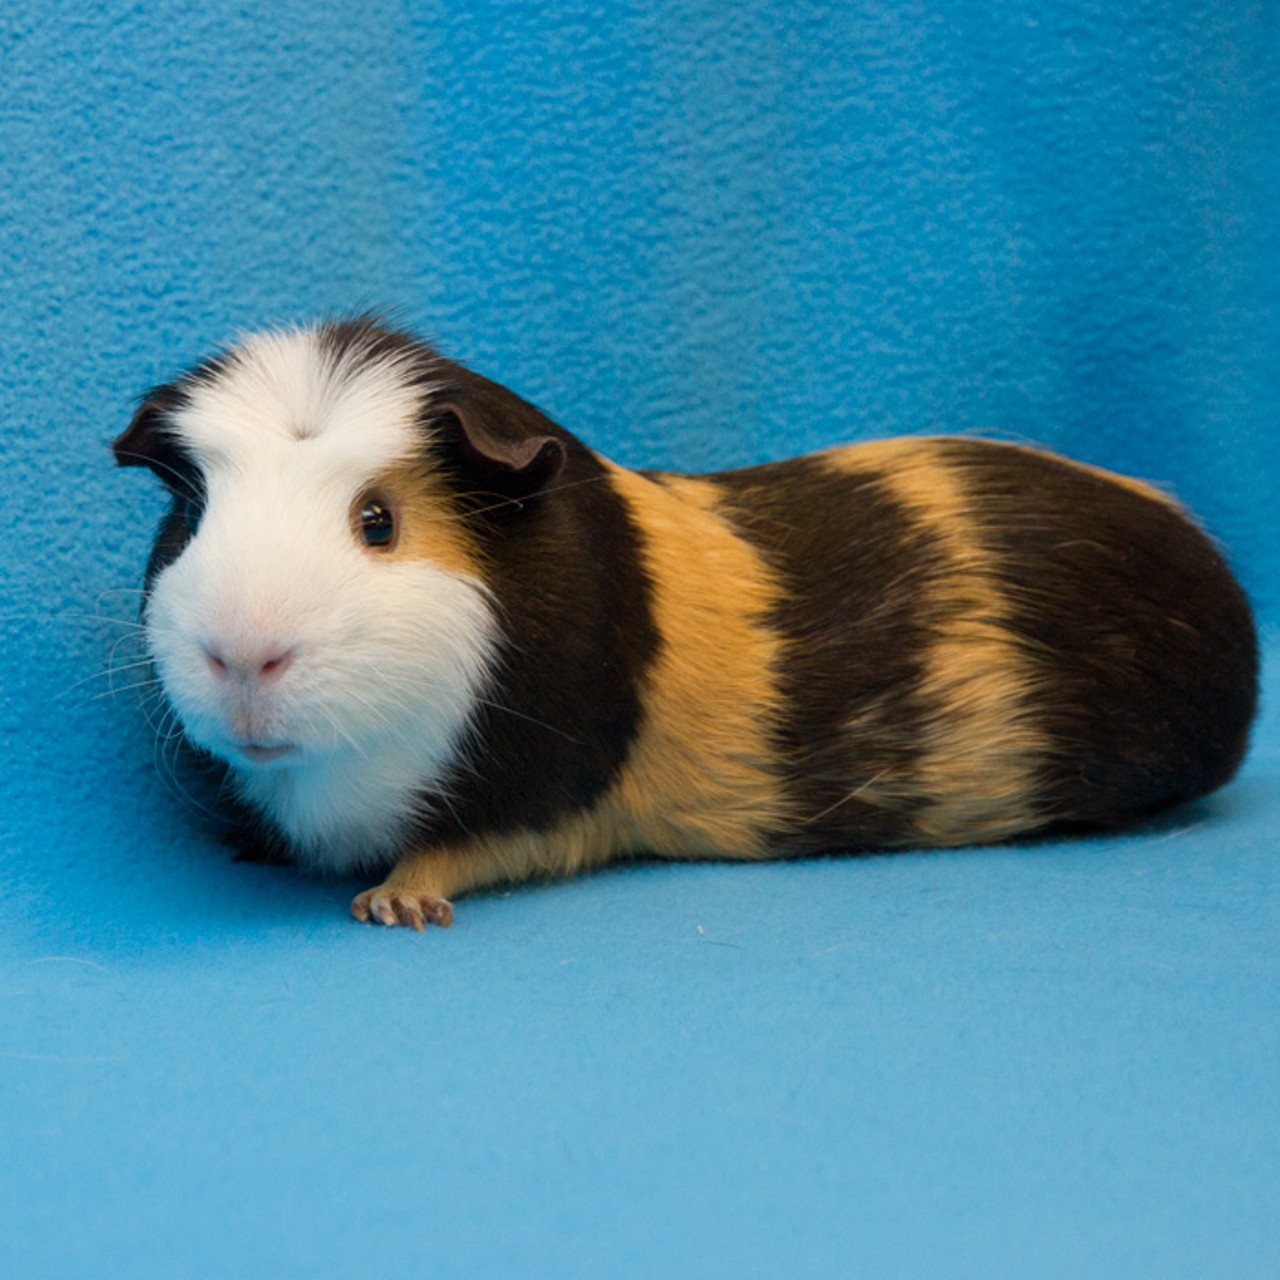  NAME: Pepper
GENDER: Male
BREED: Guinea Pig
AGE: 3 years
SPECIAL CONSIDERATIONS: Prefers to be your only guinea pig
REASON I CAME TO MHS: Owner surrender
LOCATION: Berman Center for Animal Care in Westland
ID NUMBER: 863352